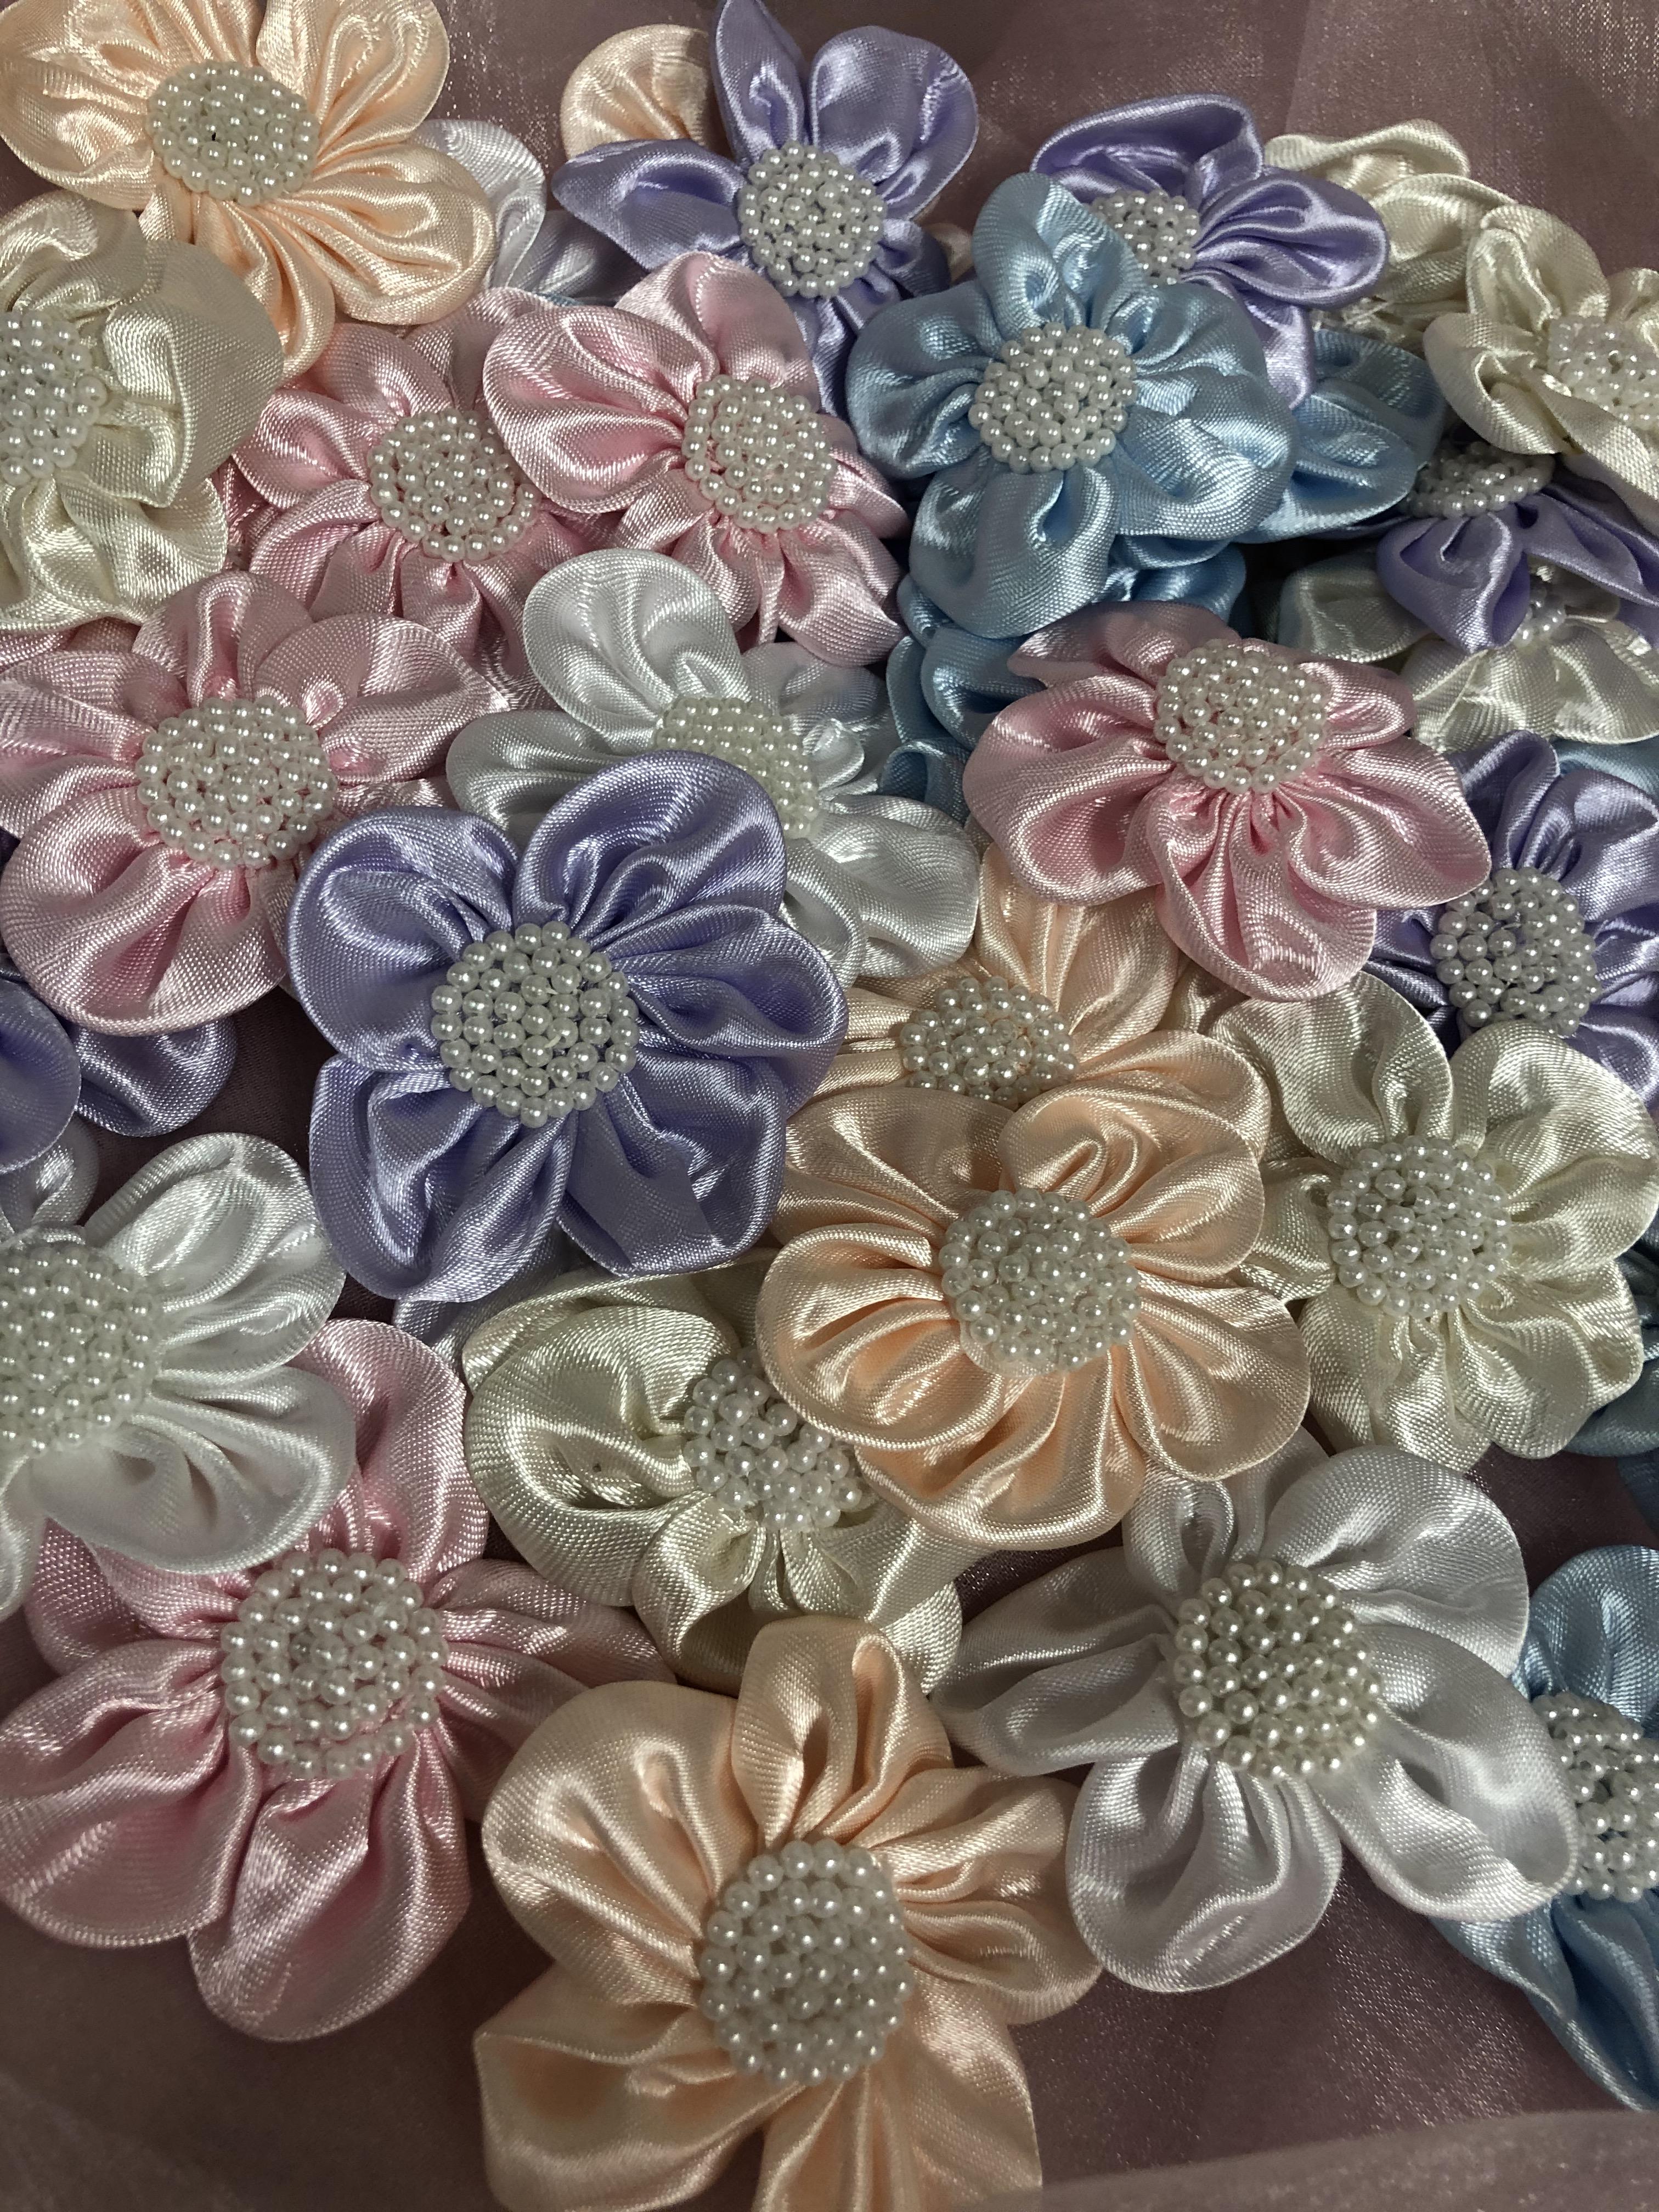 CHARMED 2 1/4" Satin W/ Pearls Flowers Arts Crafts DIY Applique 50 pieces - image 3 of 3